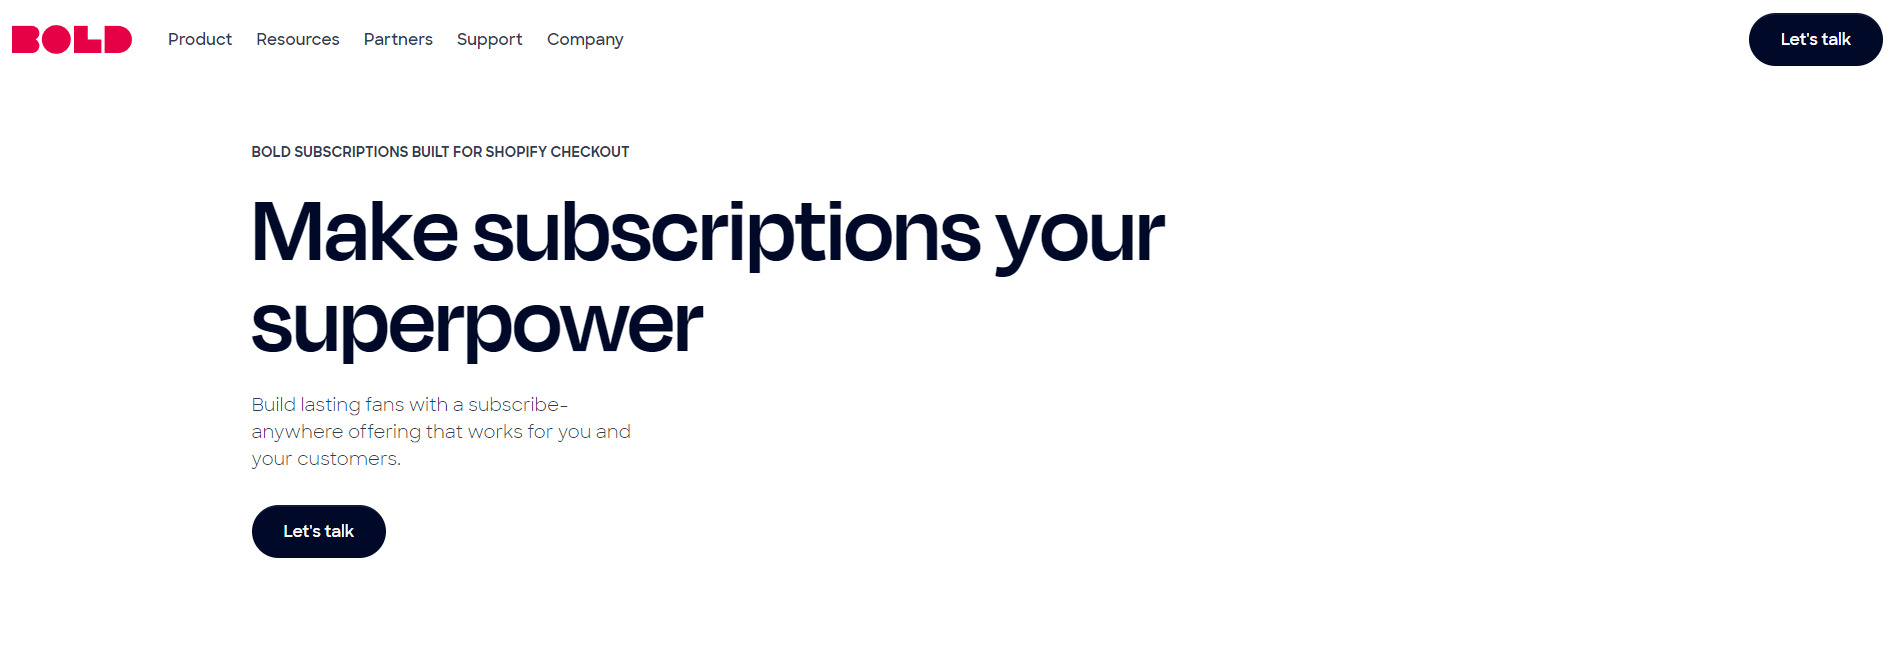 best subscription applications for shopify Bold Subscriptions